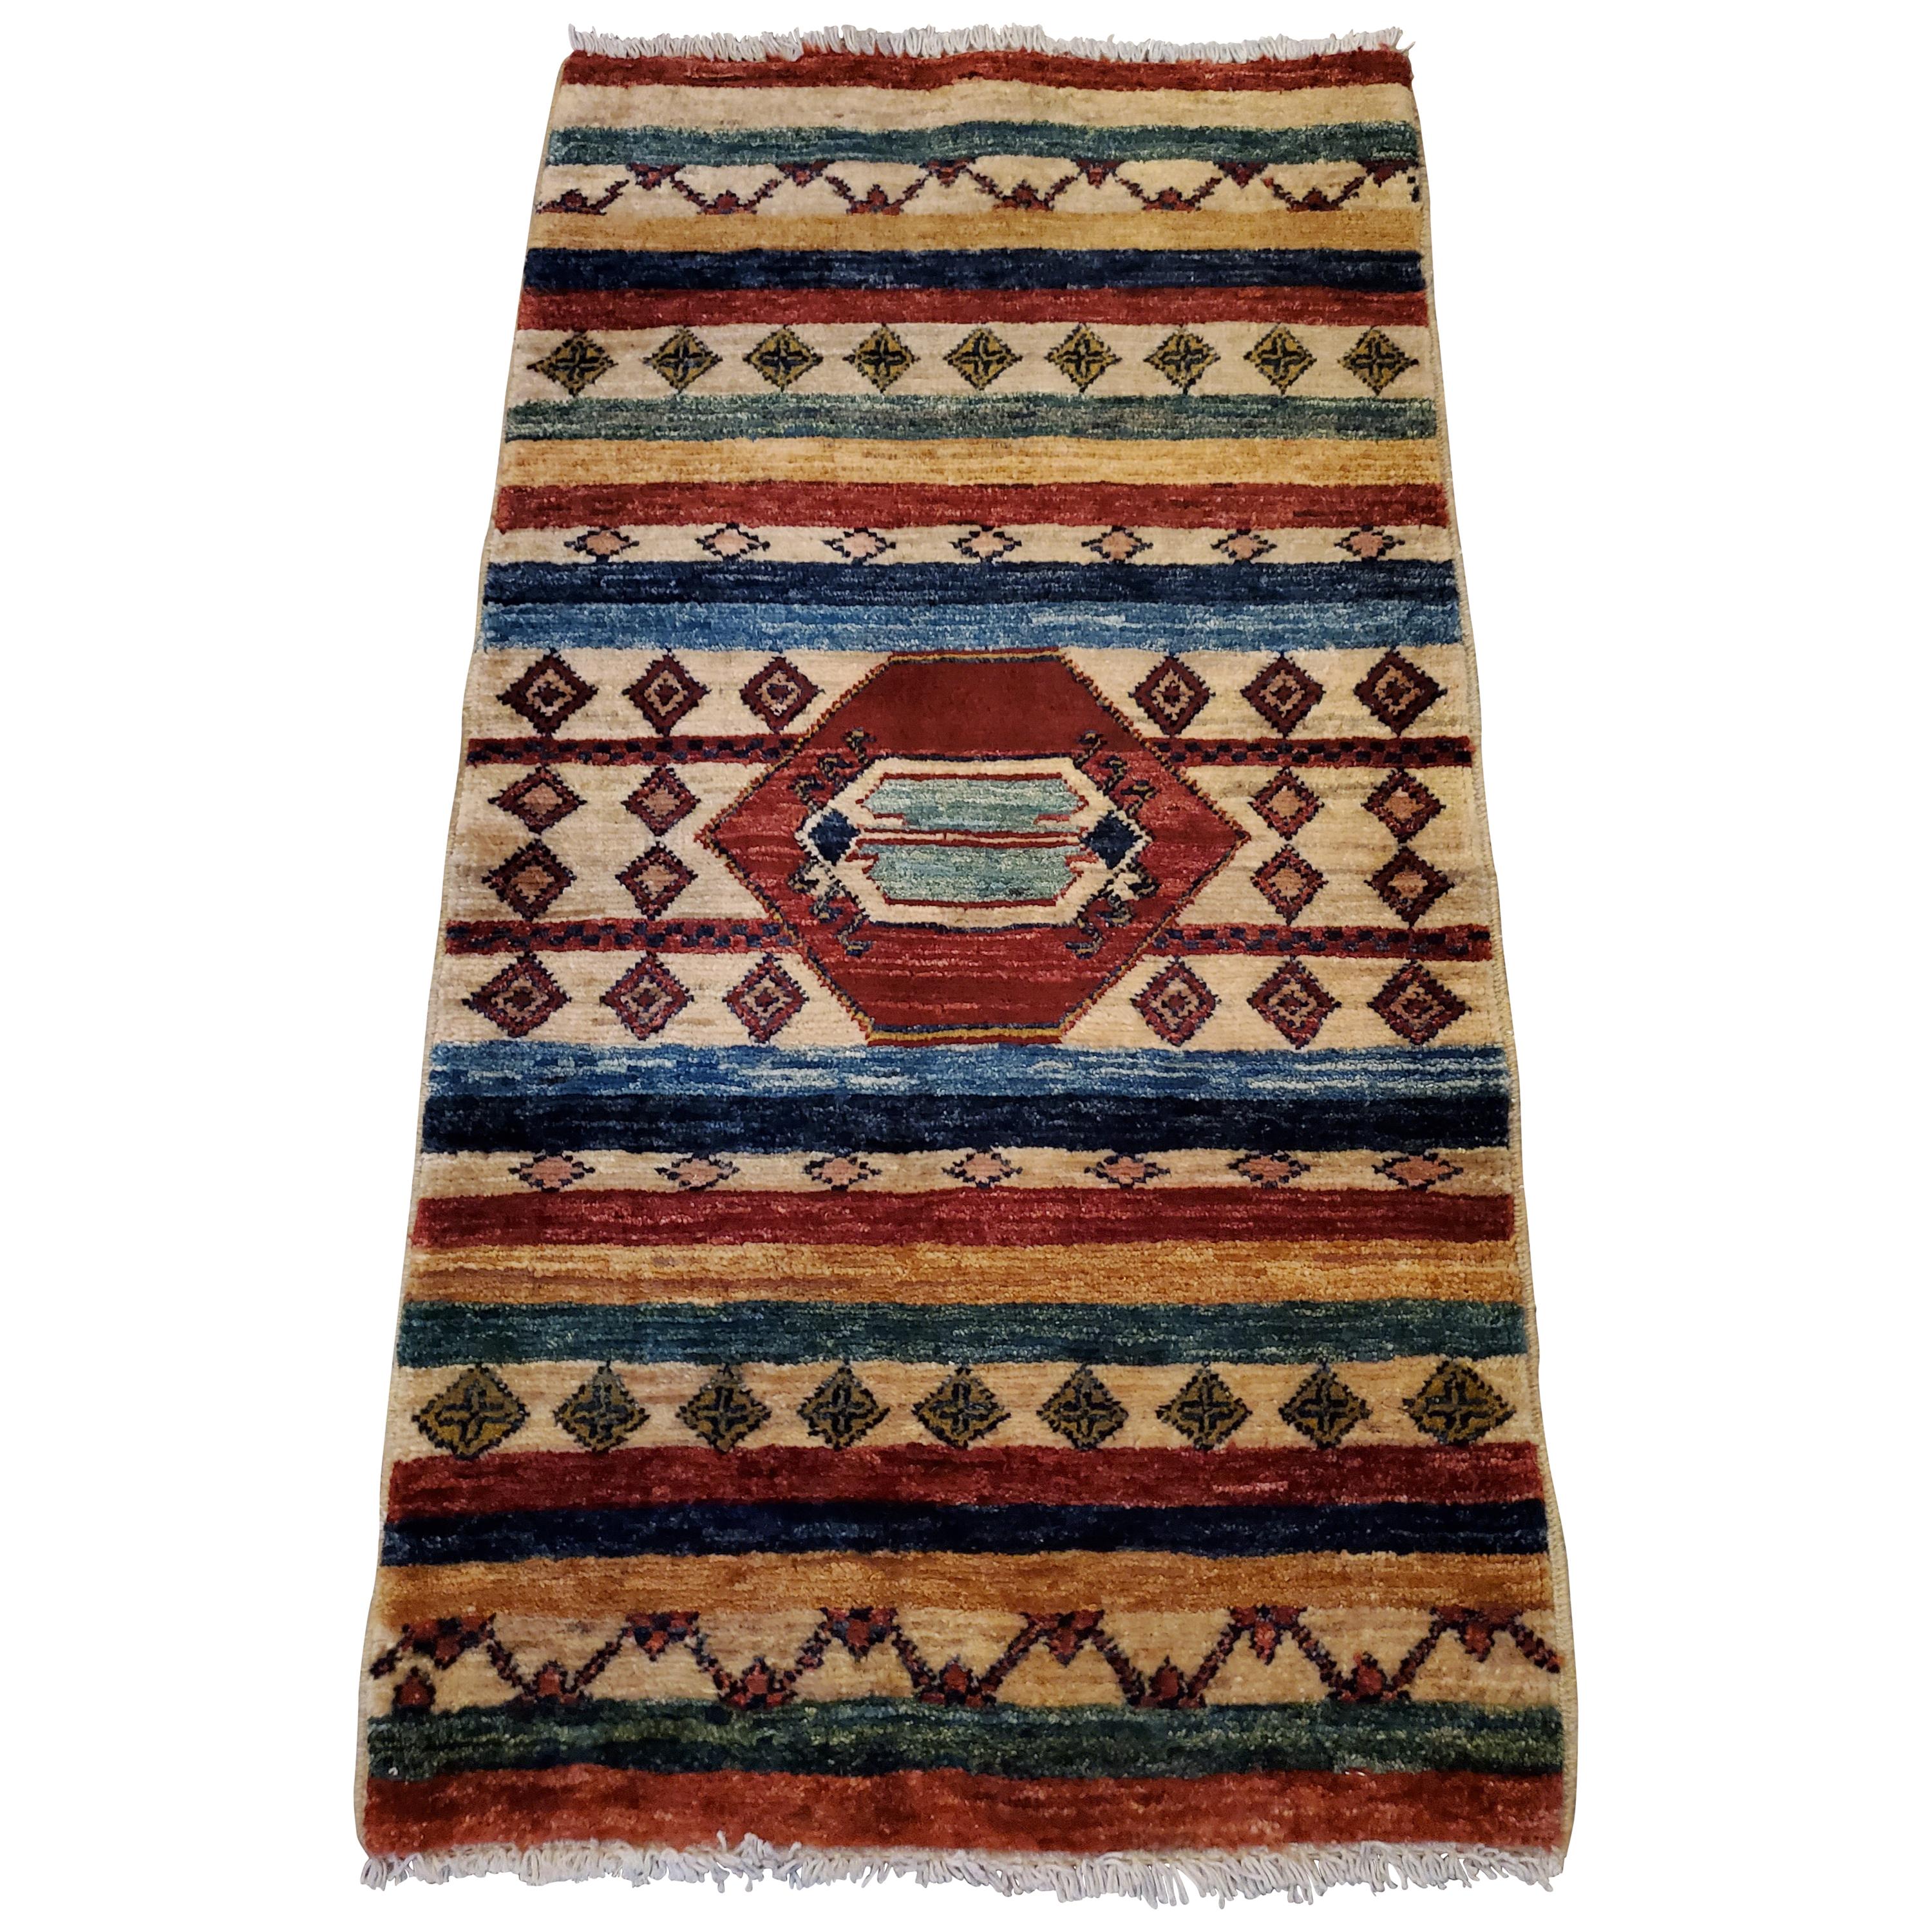 Medium Size Asian Area Rug, Colorful / 194 For Sale